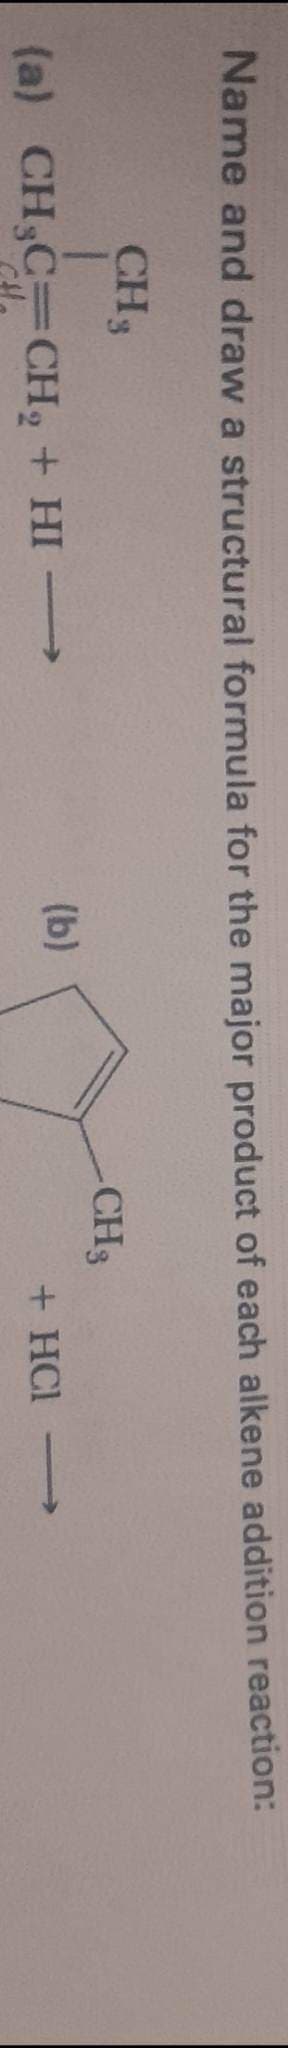 Name and draw a structural formula for the major product of each alkene addition reaction:
CH S
(a) CH₂C=CH₂ + HI →→→→
(b)
CH 3
+ HCl